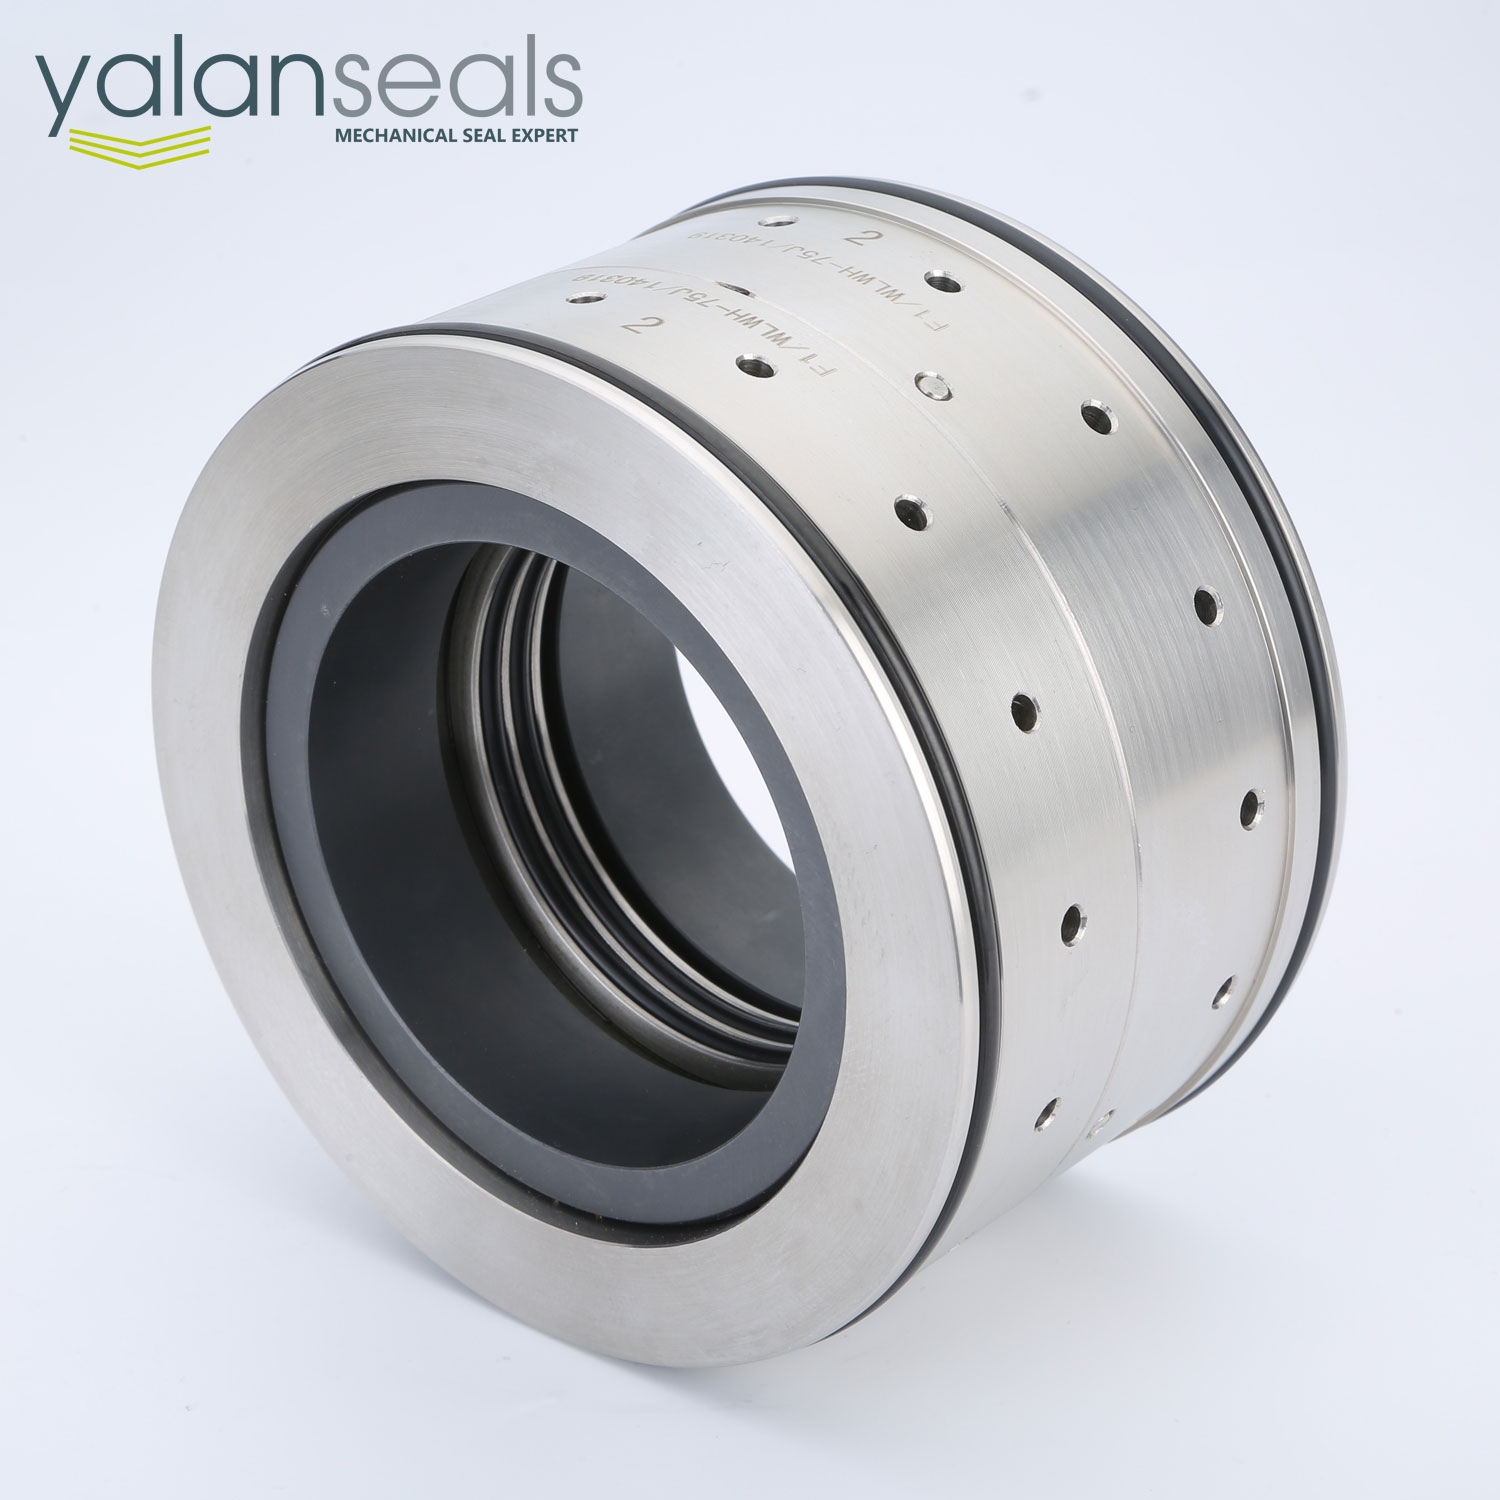 Customized Nonstandard Mechanical Seals for WILO